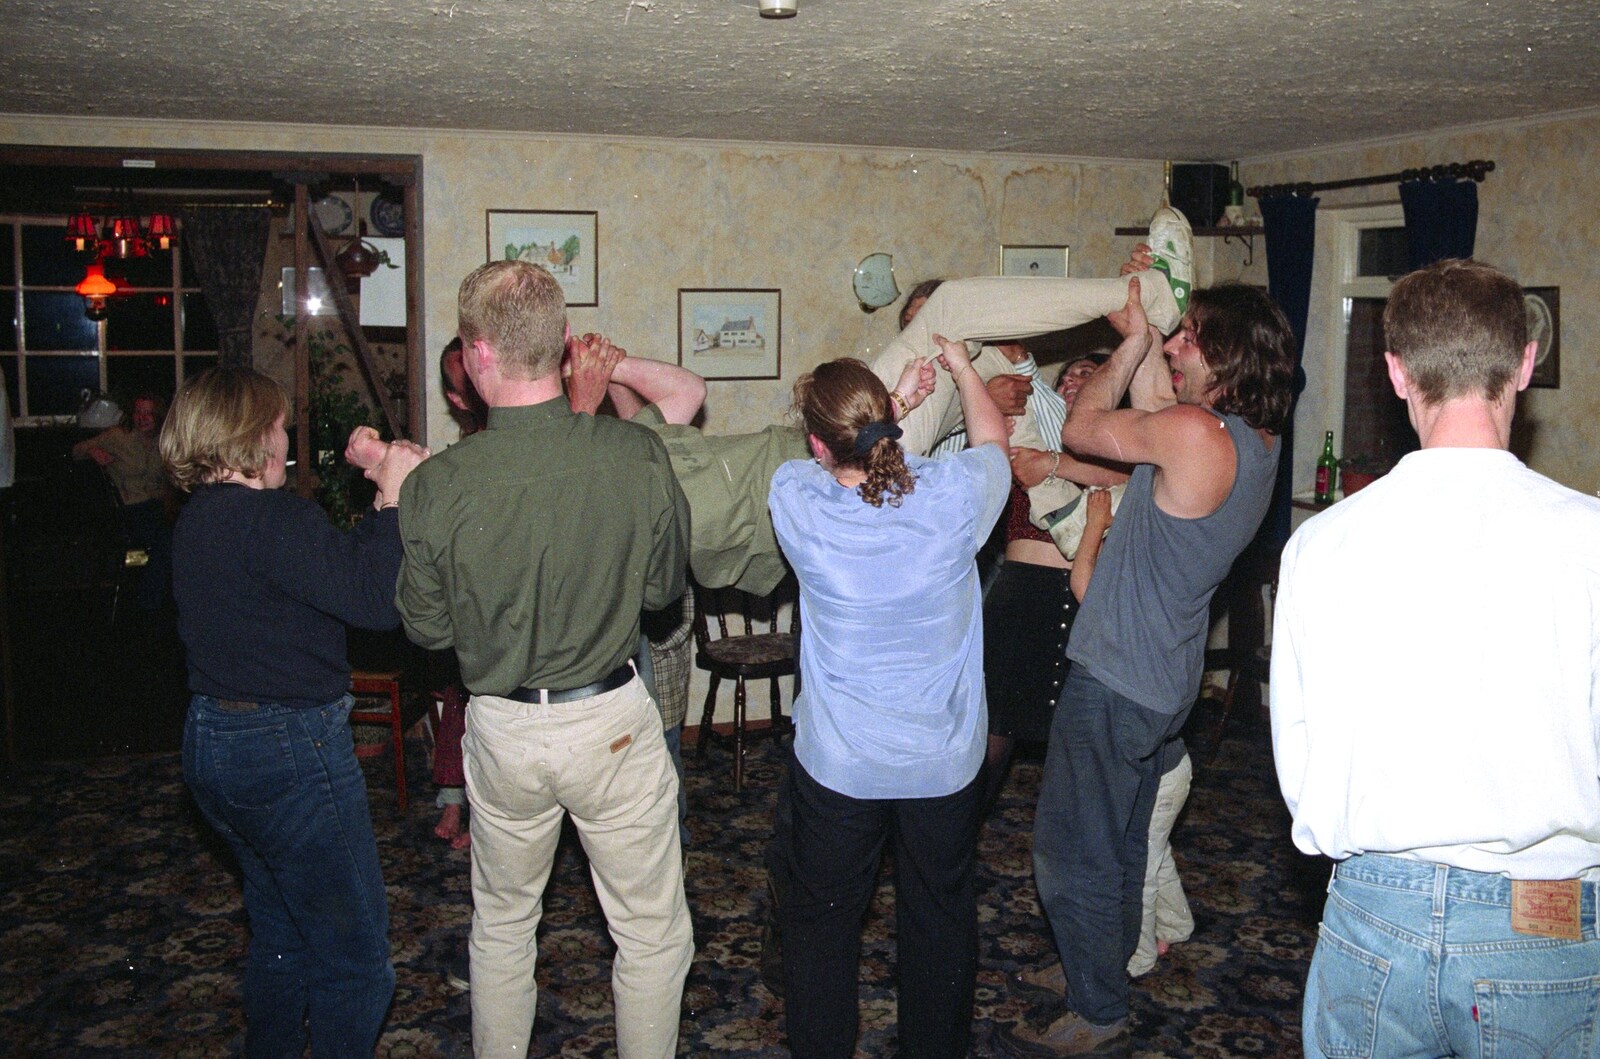 Wavy gets the bumps from Wavy's Thirtieth Birthday, The Swan Inn, Brome, Suffolk - 24th May 2000